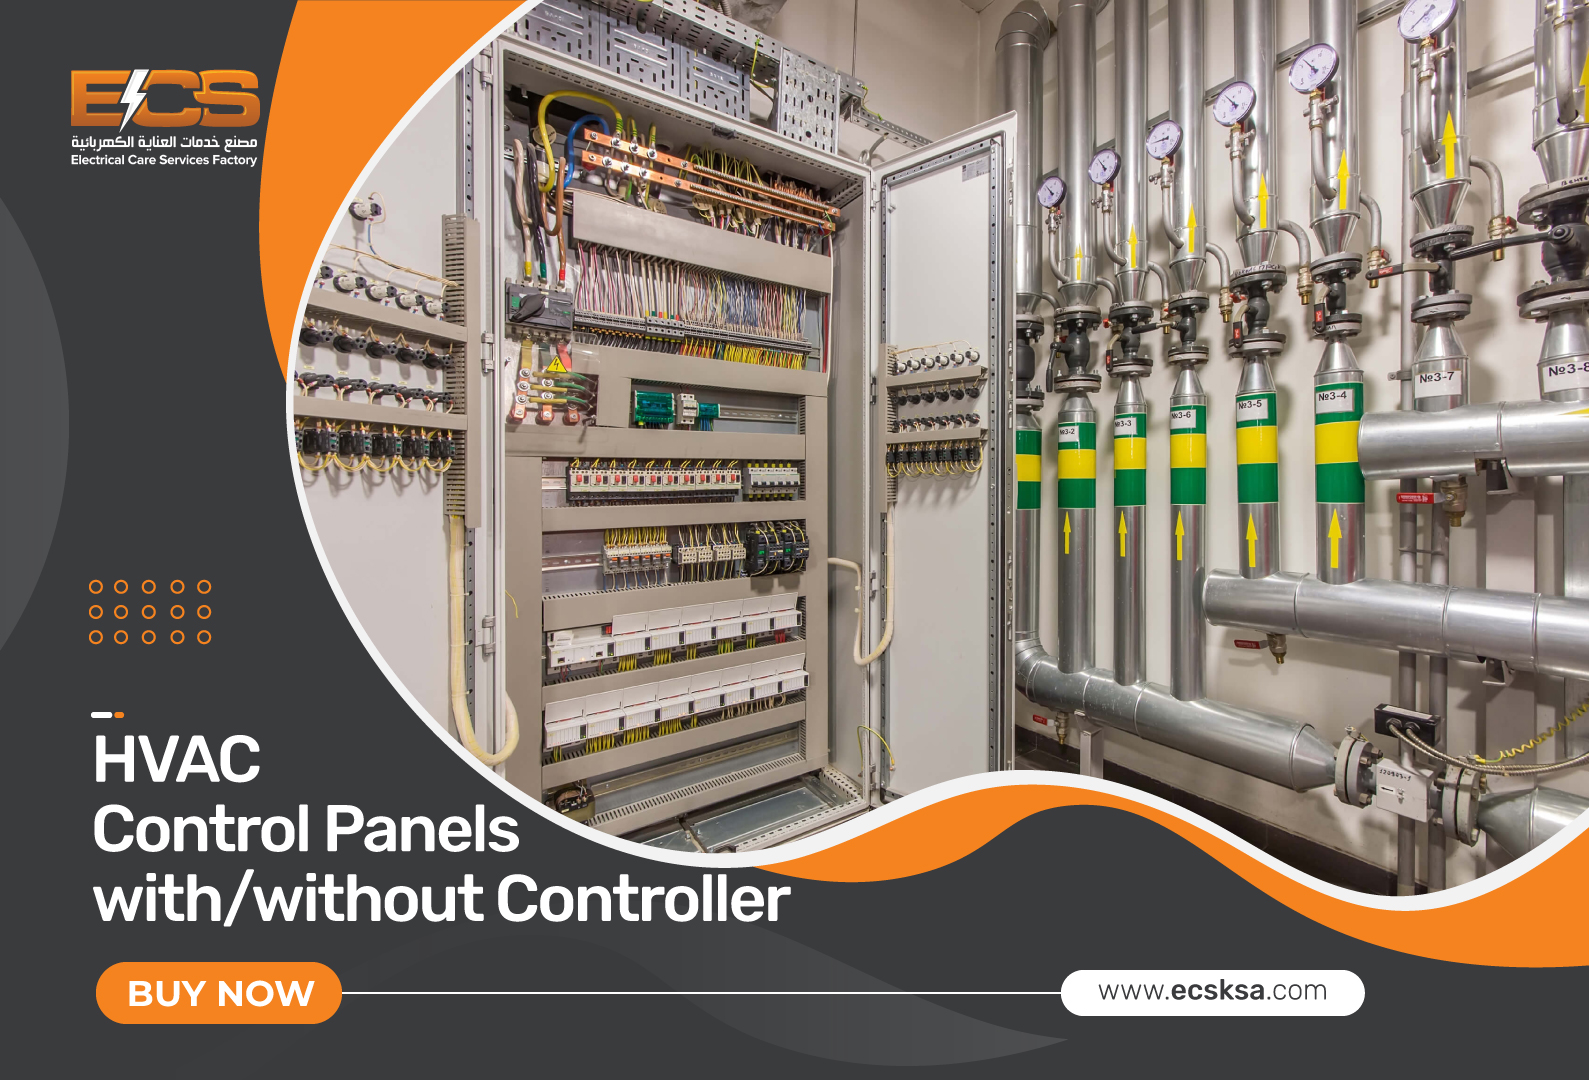 HVAC Control Panels withwithout Controller